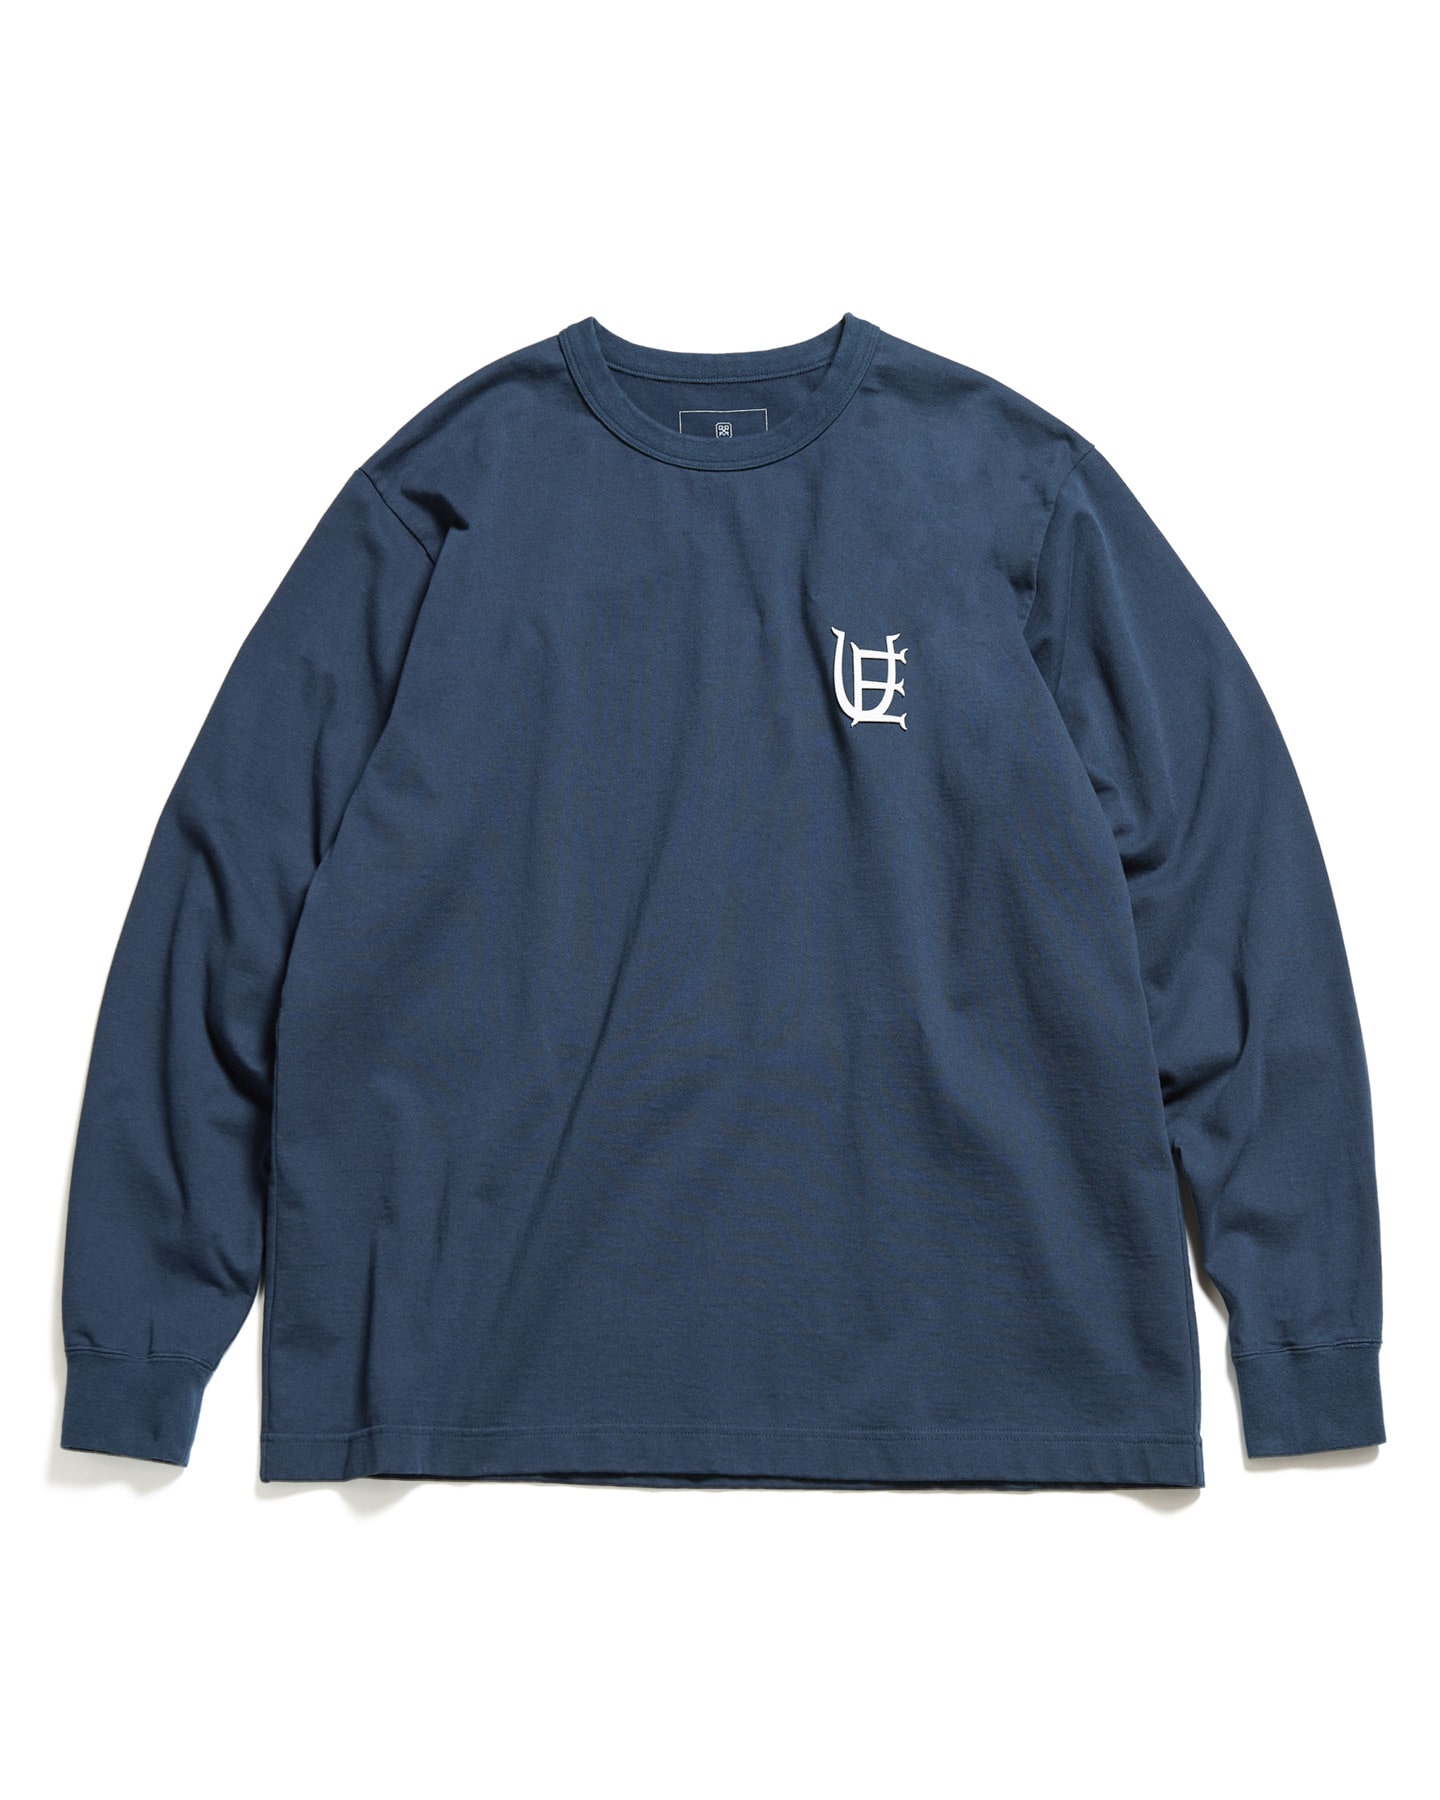 SOPH. | AUTHENTIC LOGO L/S WIDE TEE(2 NAVY):